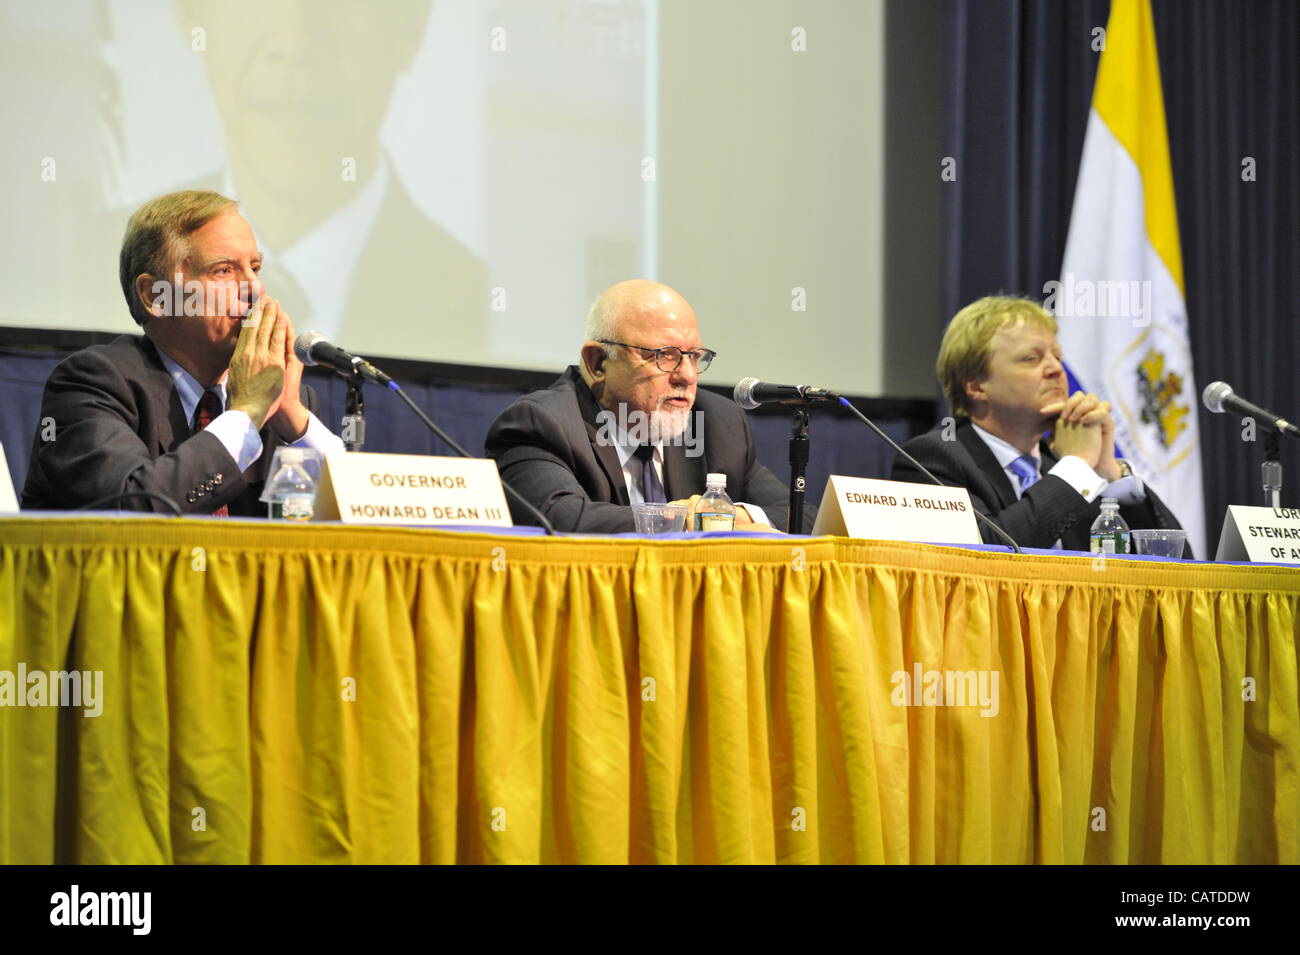 Governor Howard B. Dean III (left), Edward J. Rollins (center), and Lord Stewart Wood of Anfield (right) are panelists at "Change in the White House?” on Thursday, April 19, 2012, at Hofstra University, Hempstead, New York, USA. Hofstra's event was part of its “Debate 2012." Stock Photo